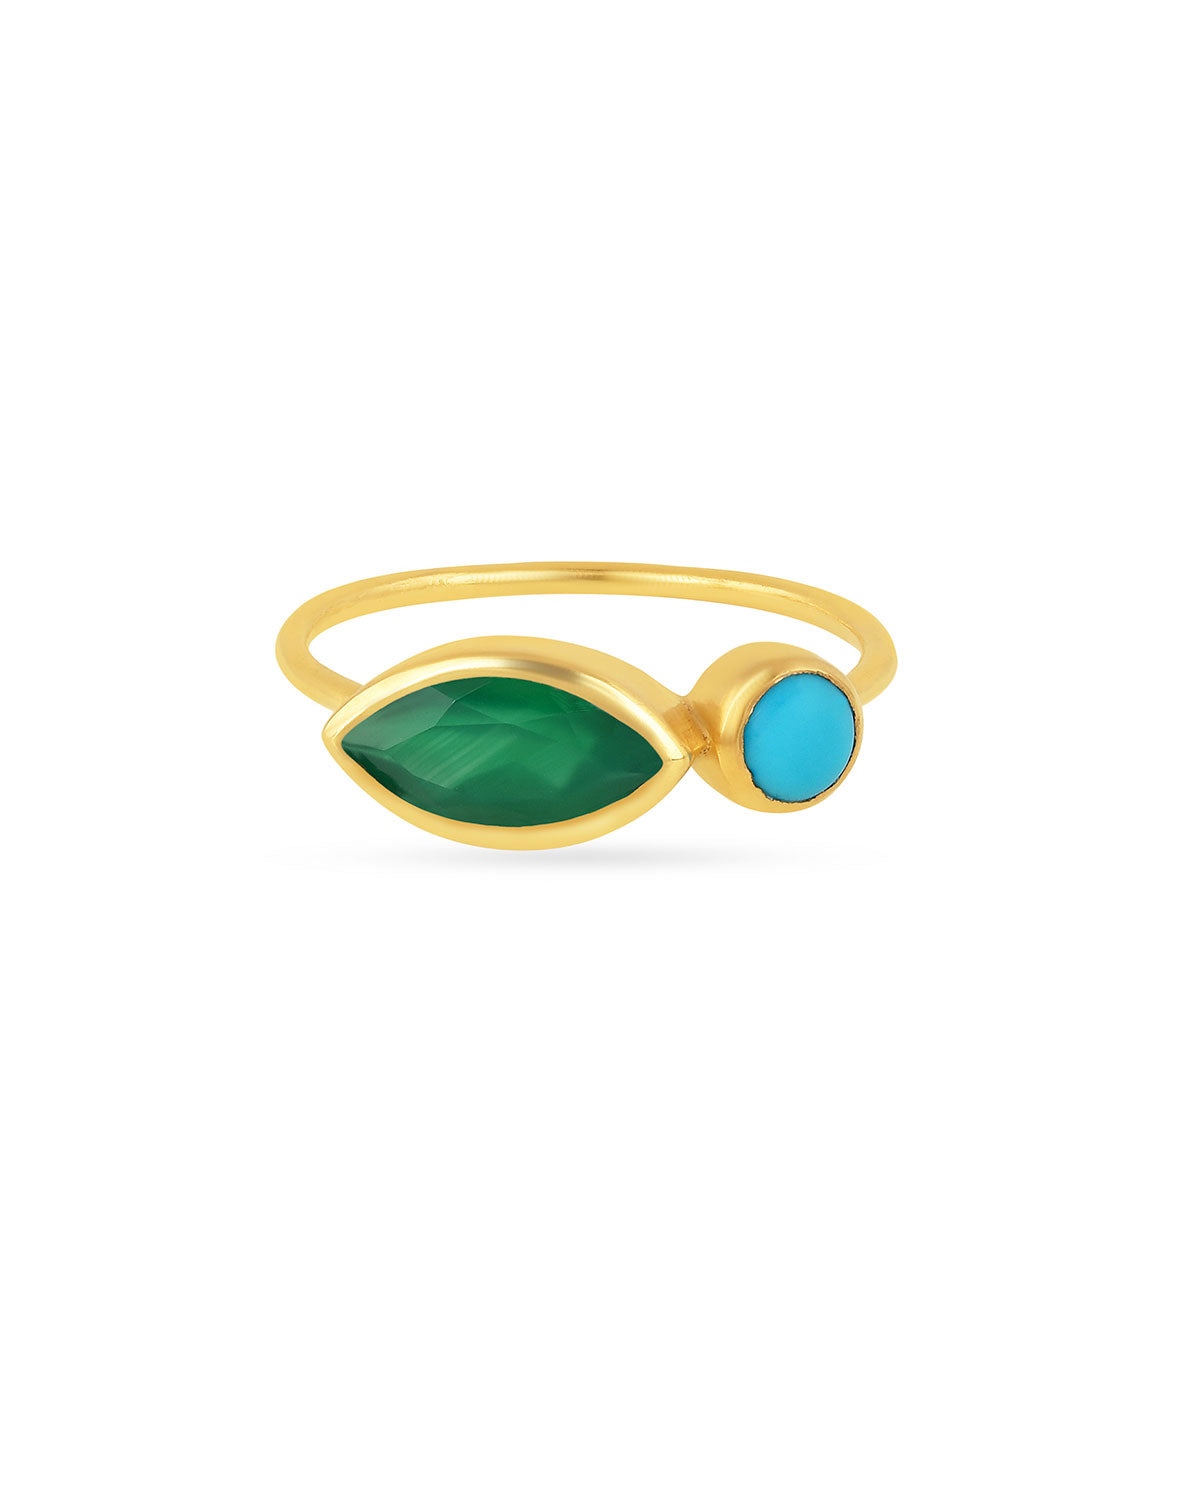 Green Onyx & Turquoise Gold Rings - The ‘Euphorie’